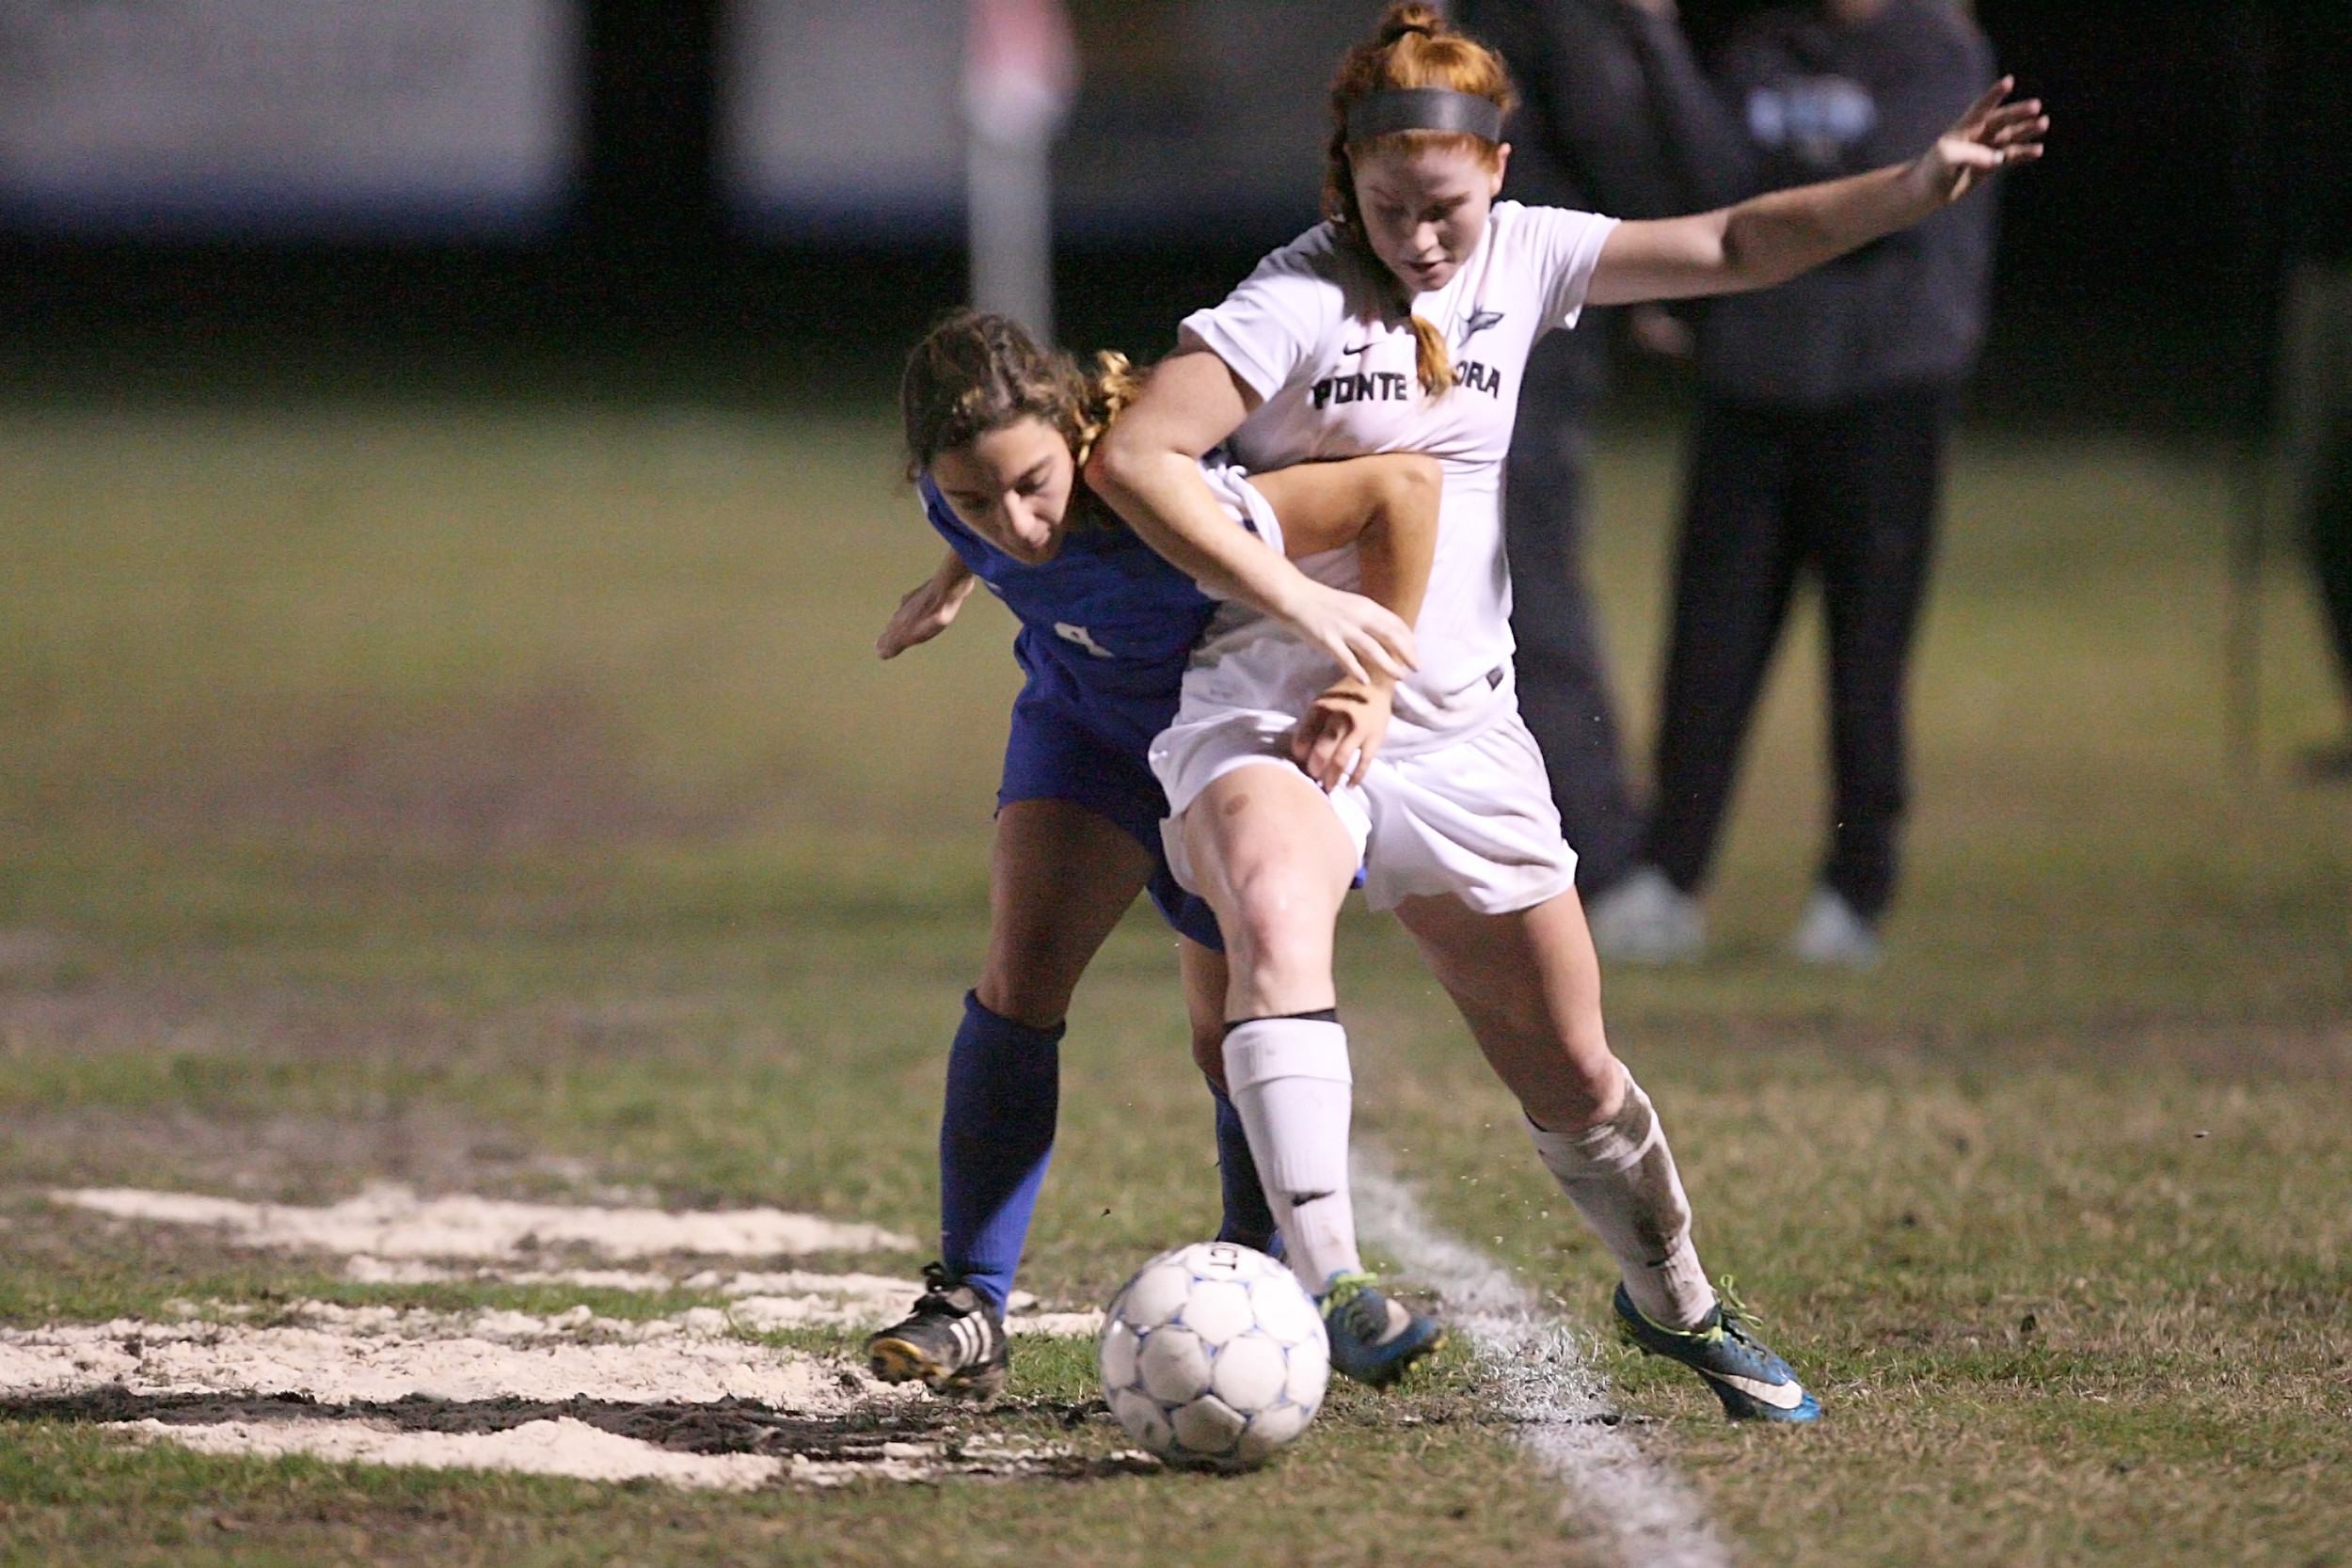 Ponte Vedra’s Marissa Reinker is held by the Clay defender. The Sharks played to a 1-1 tie despite out playing Clay by a wide margin. Clay scored the tying goal in the second half on a controversial penalty shot.